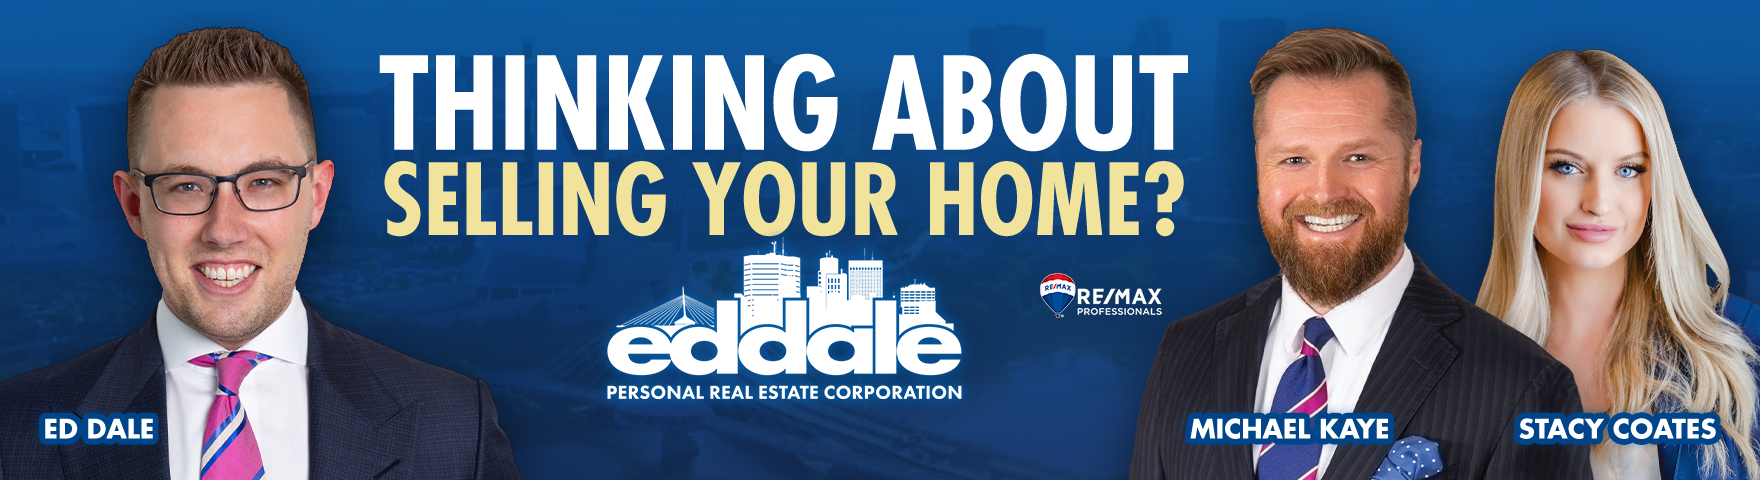 Thinking about selling your home? Reach out to the Ed Dale team for a free assessment!